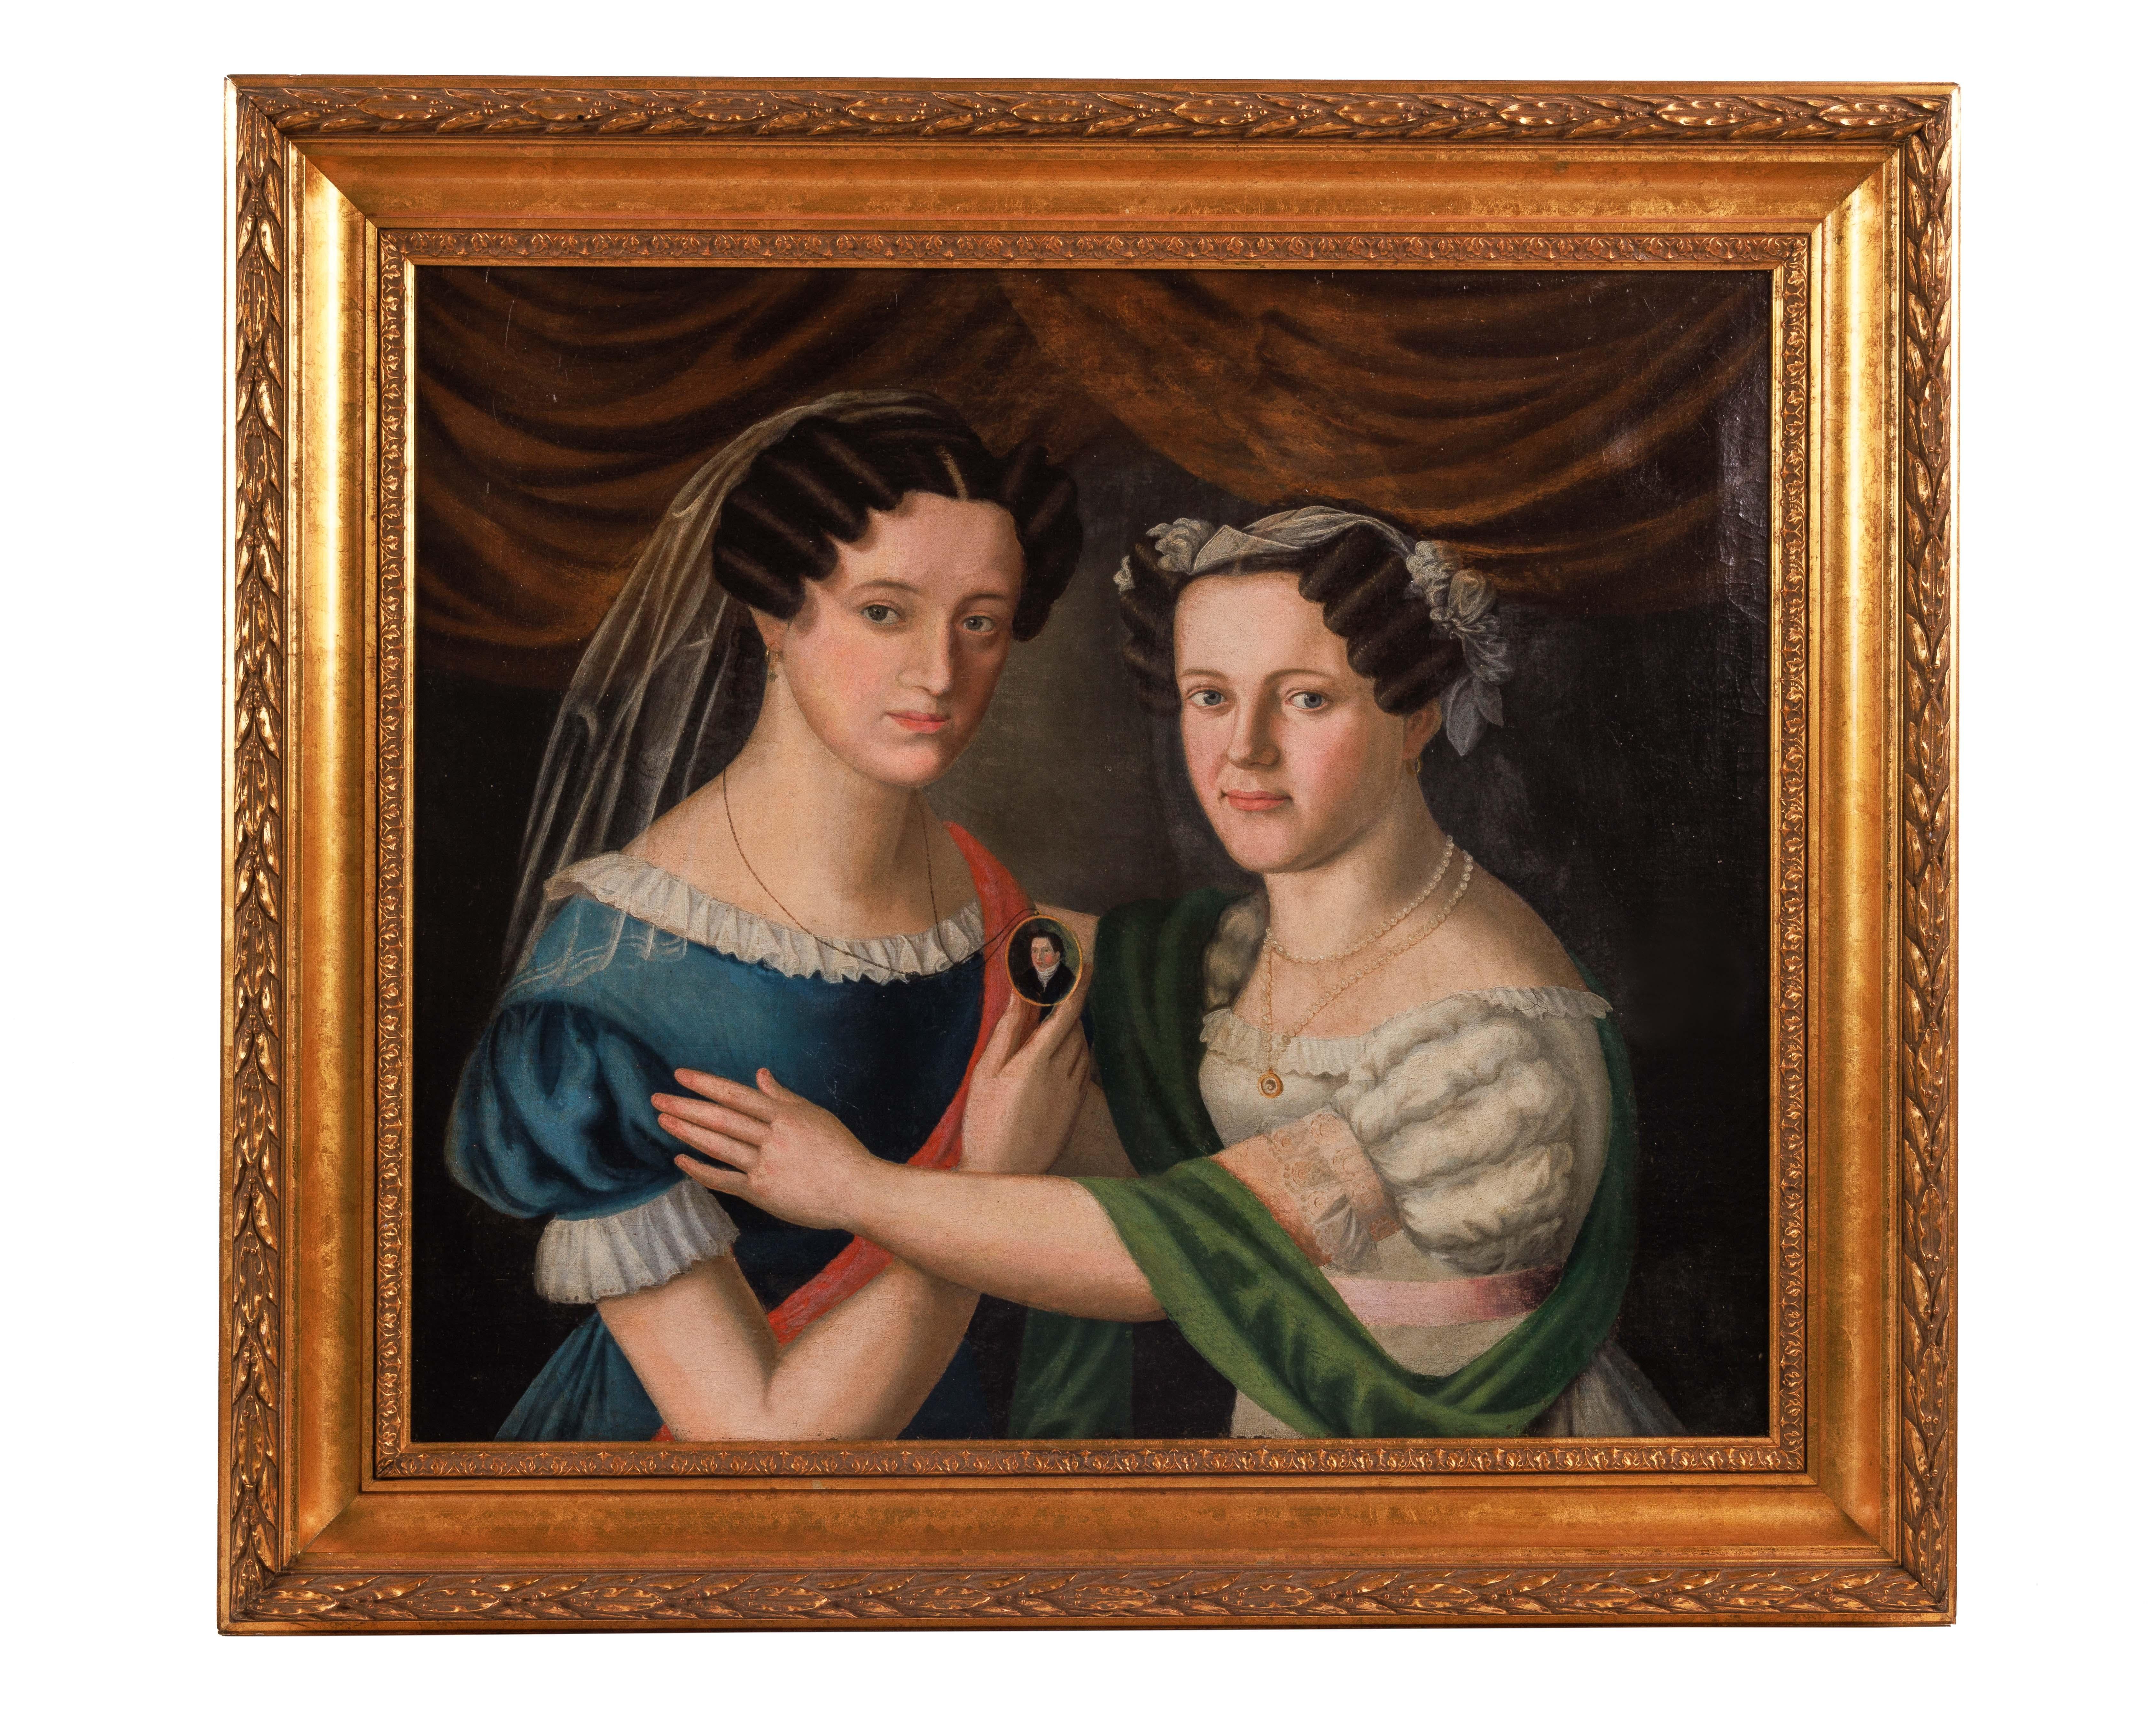 Unknown Figurative Painting - (American School, C. 1825) An Exceptional Quality Portrait of "Two Sisters"